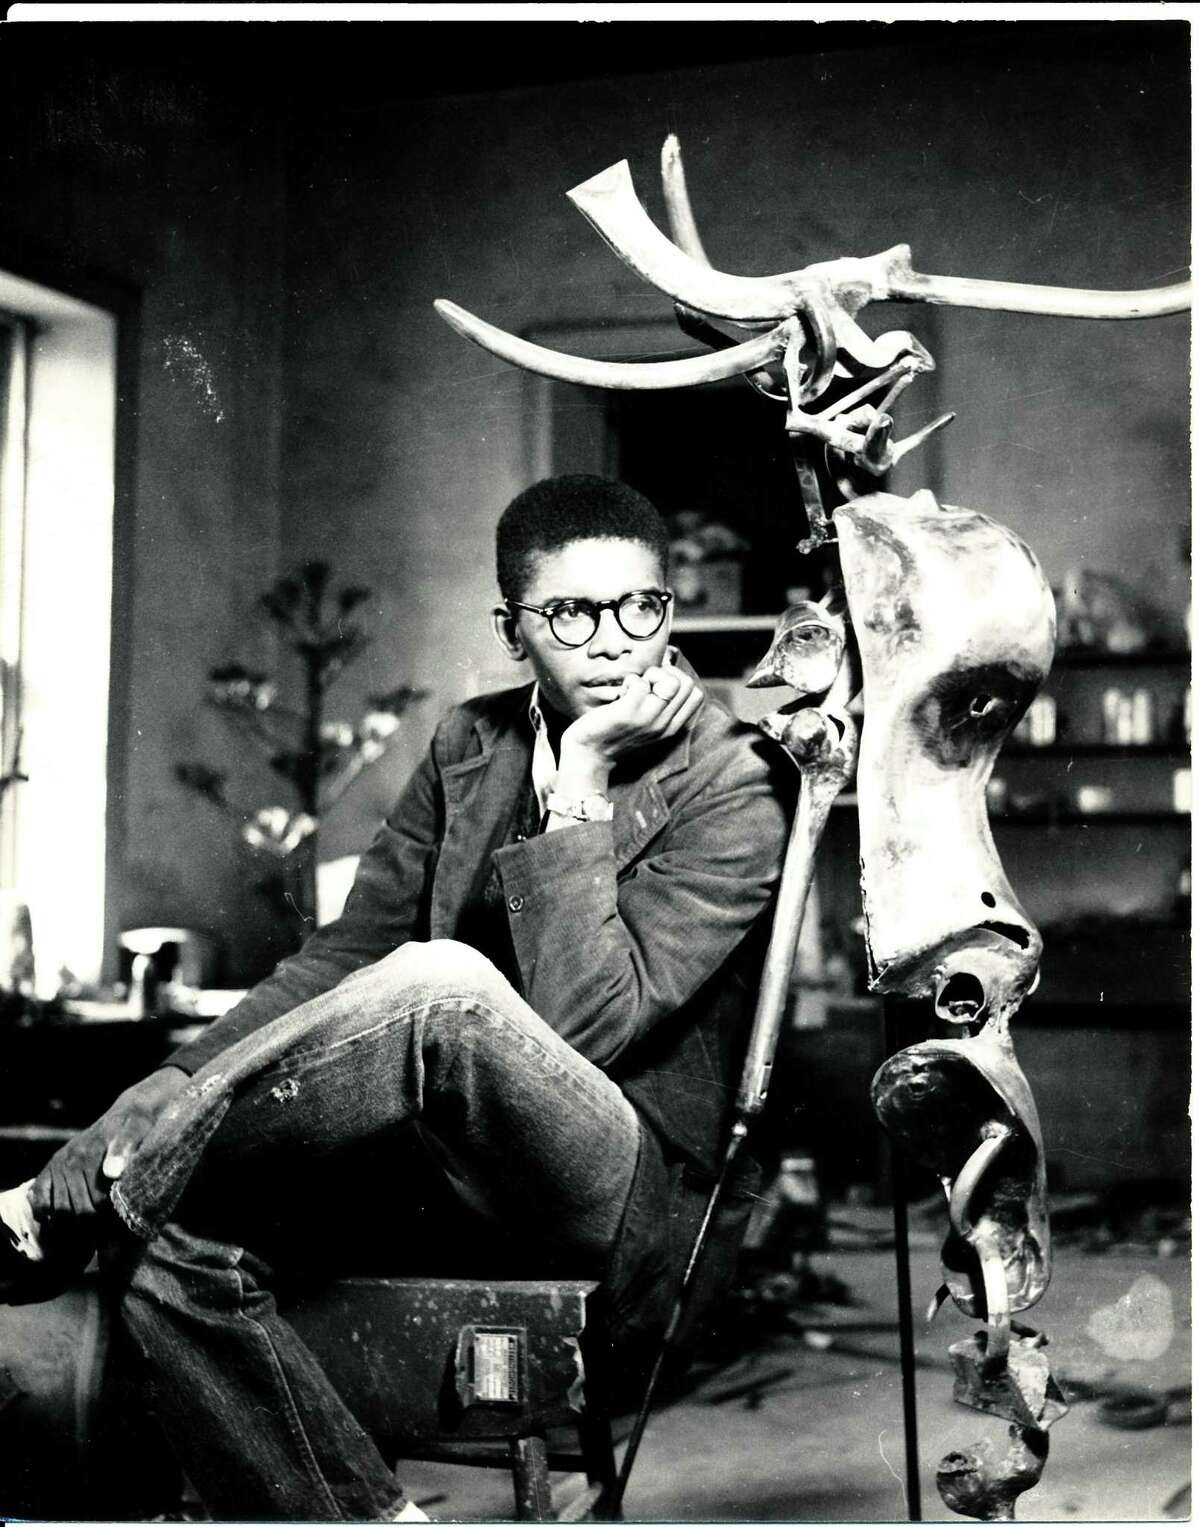 This photo by noted photographer and textile artist Martha Mood shows Richard Hunt at the Mills Race Studio in about 1960, decades after sculptor Gutzon Borglum used the studio in the 1920s and ‘30 to develop prototypes for Mount Rushmore. Hunt, then in his mid-20s, went on to become a prolific sculptor who broke many social and cultural barriers as a Black artist. He was embraced by San Antonio’s arts community while serving as an Army medic at Fort Sam Houston, and ate at the Woolworth lunch counter on March 16, 1960, the day seven downtown lunch counters peacefully desegregated. Hunt now lives in Chicago.